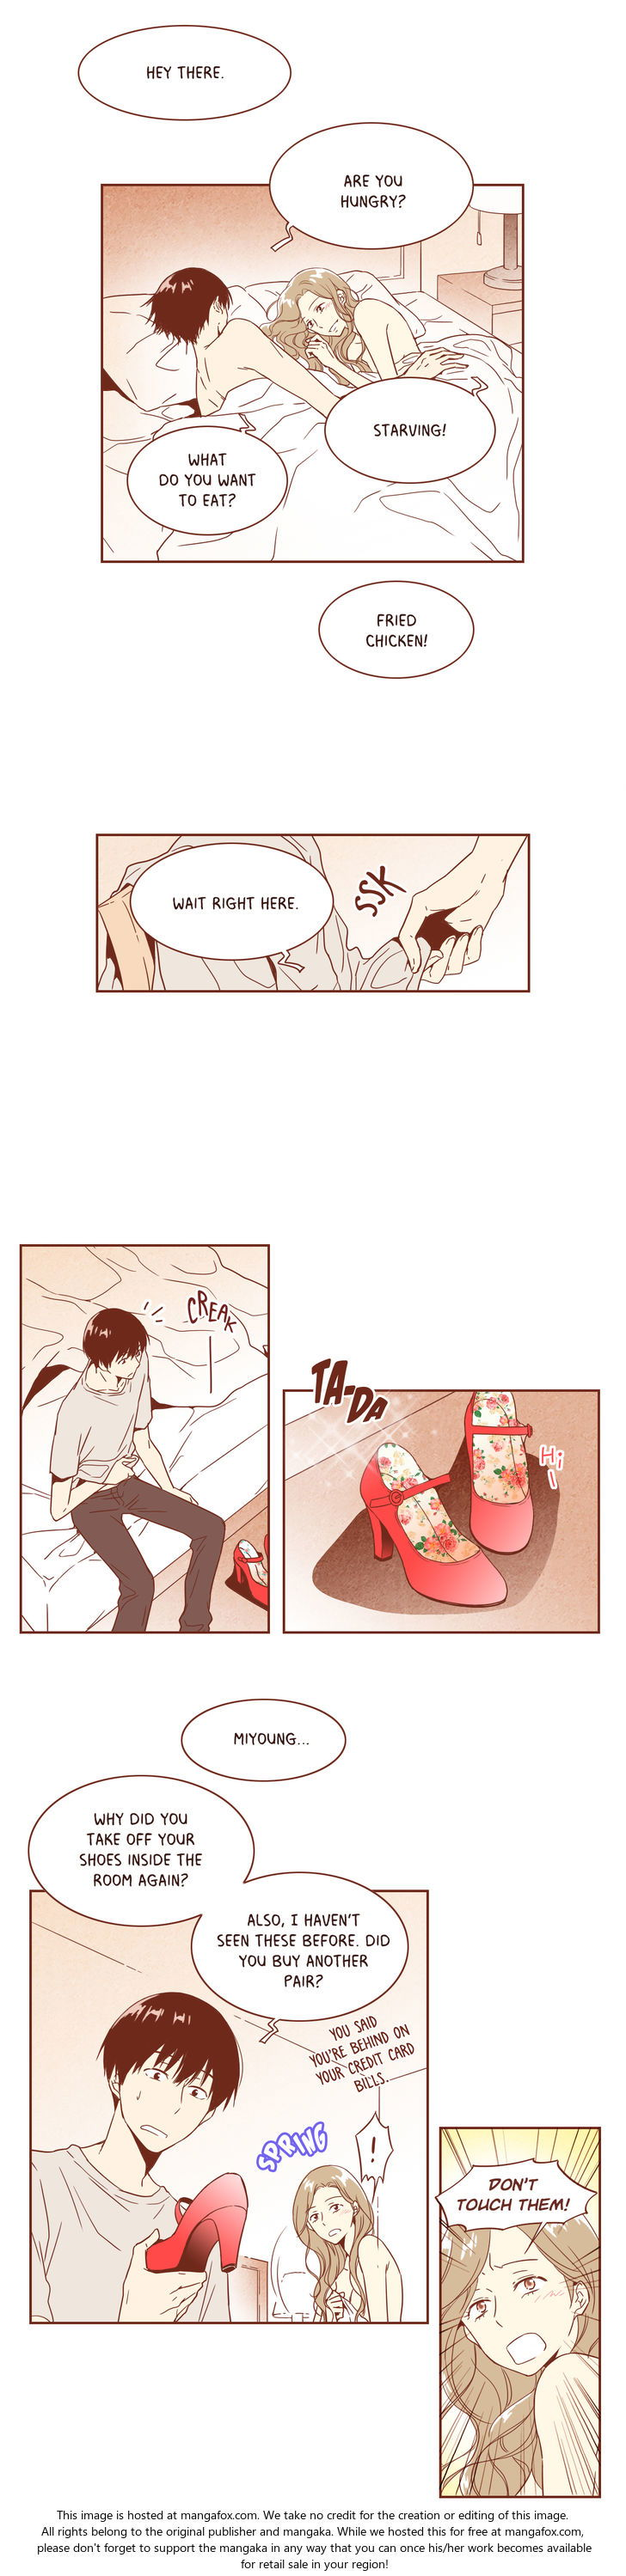 Why Did Men Stop Wearing High Heels? Chapter 003 page 5